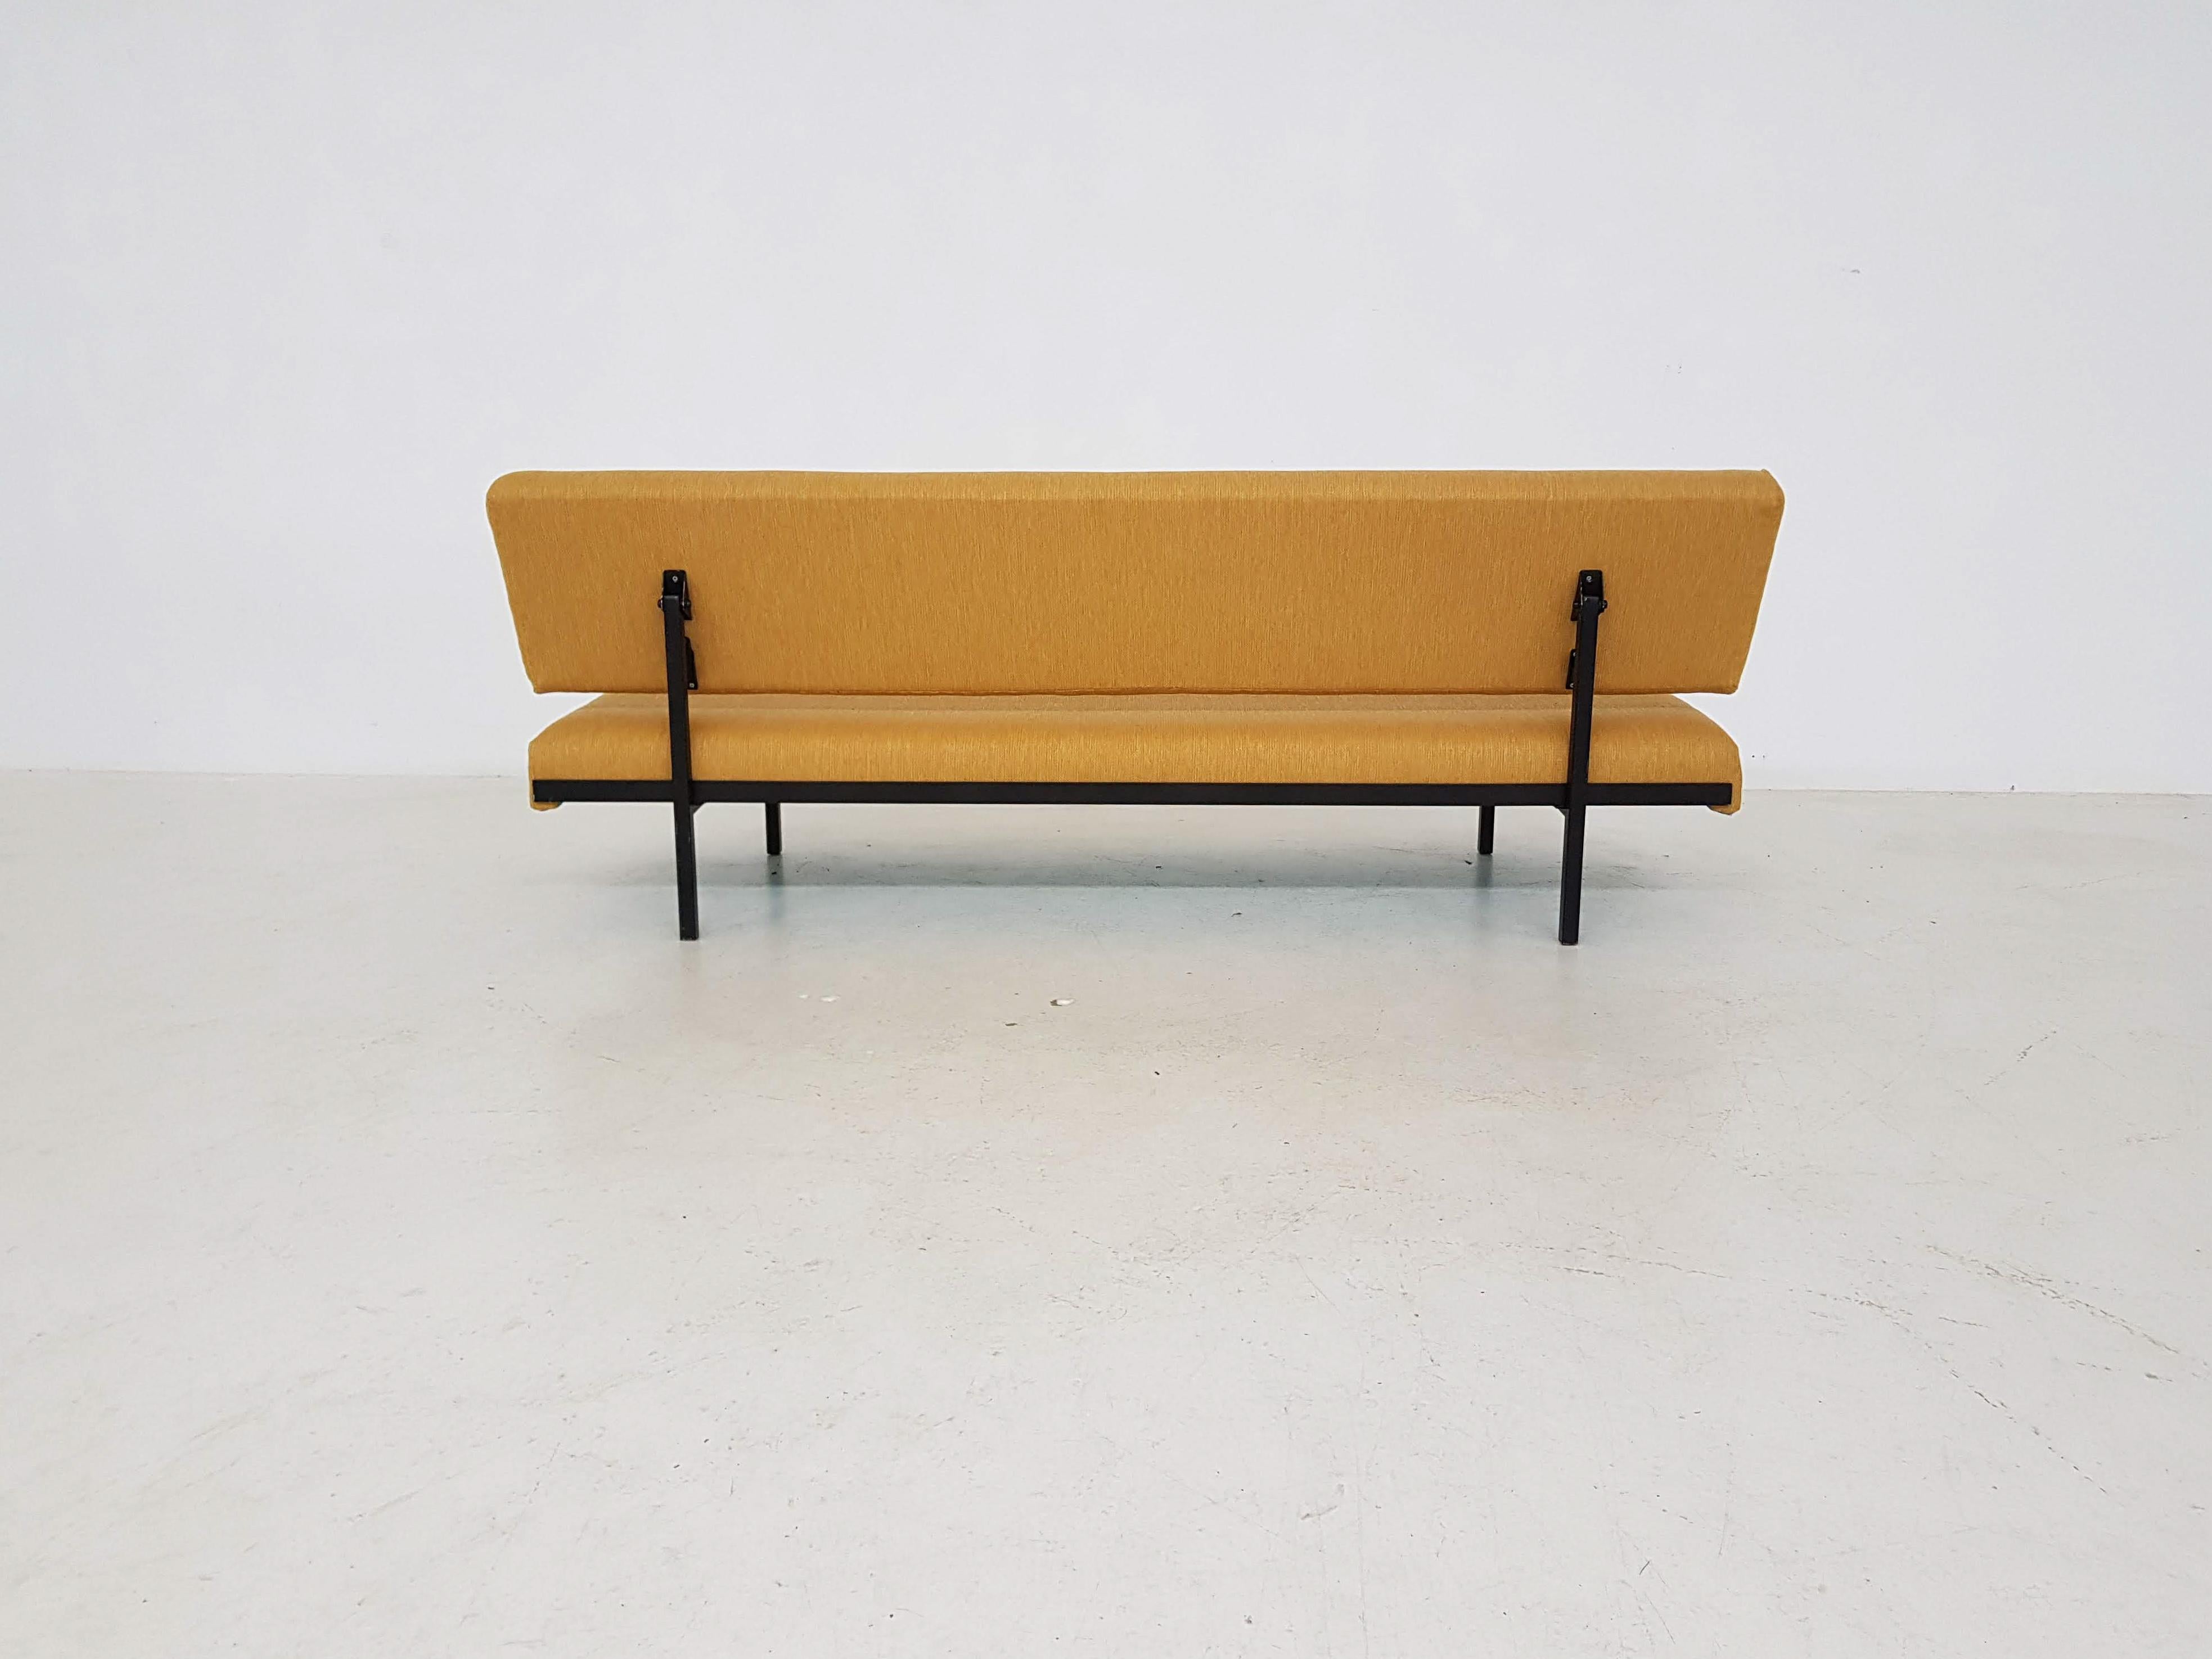 Metal Midcentury Dutch Design Sofa or Sleeper in the style of Parry and De Vries 1960s